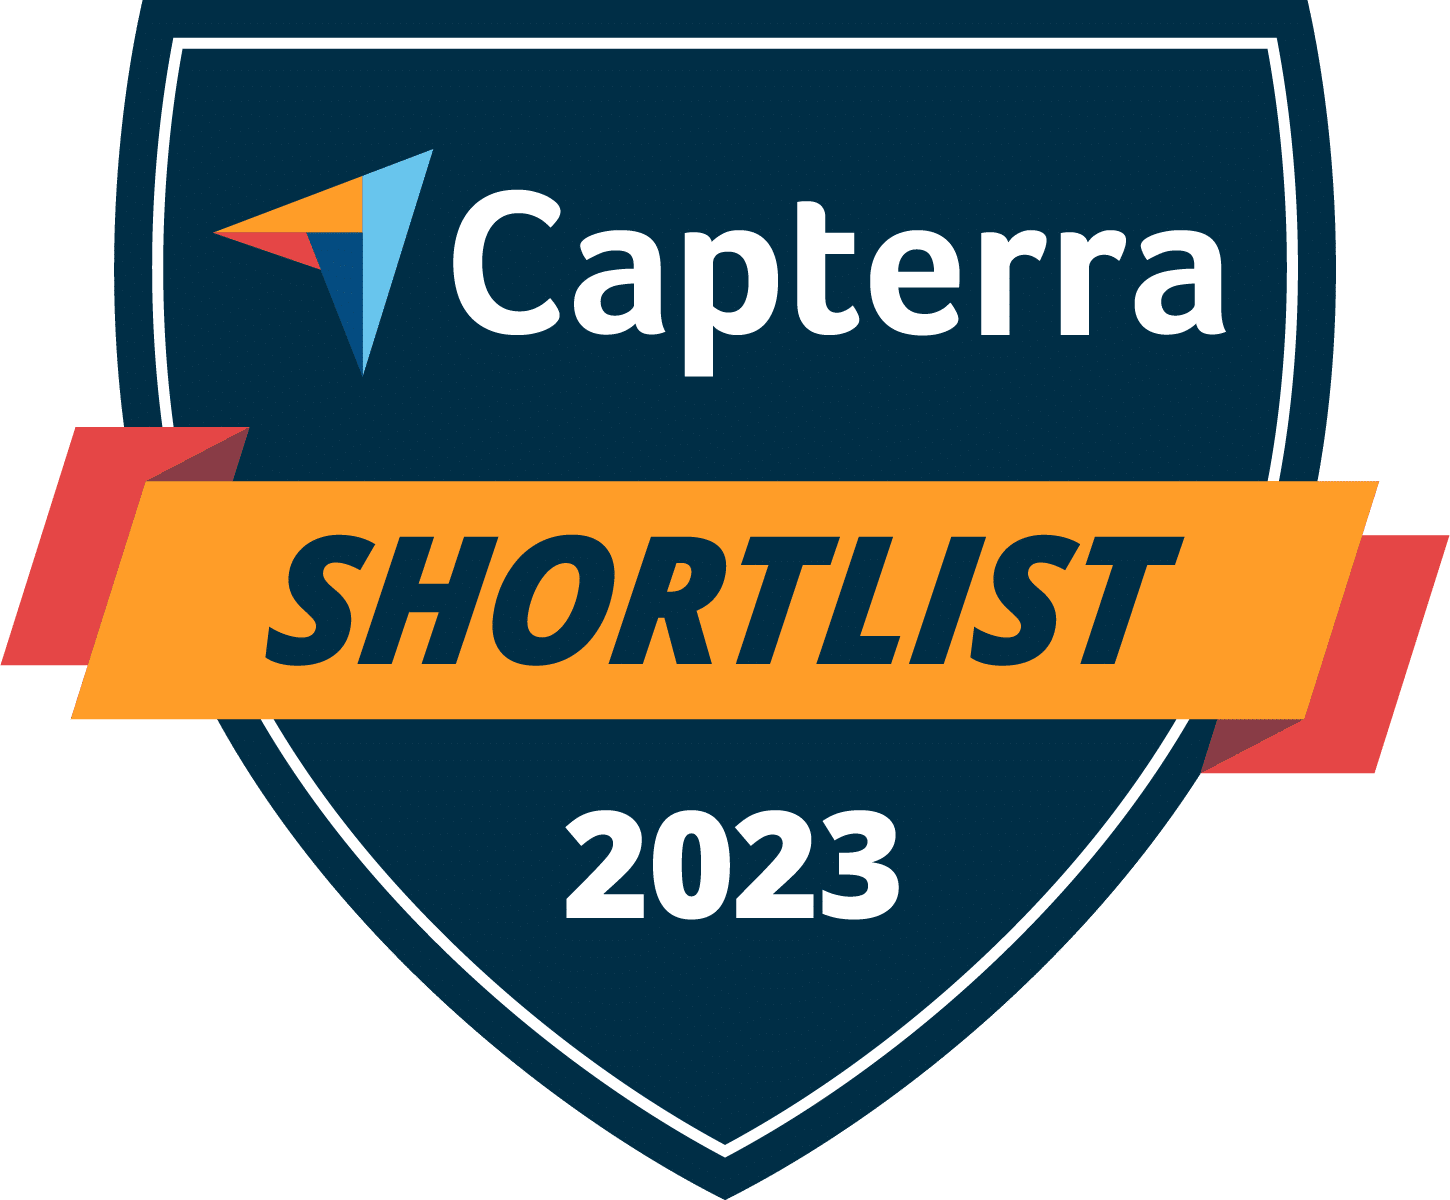 MyCase is awarded the #1 law practice management software on the 2023 Capterra Shortlist